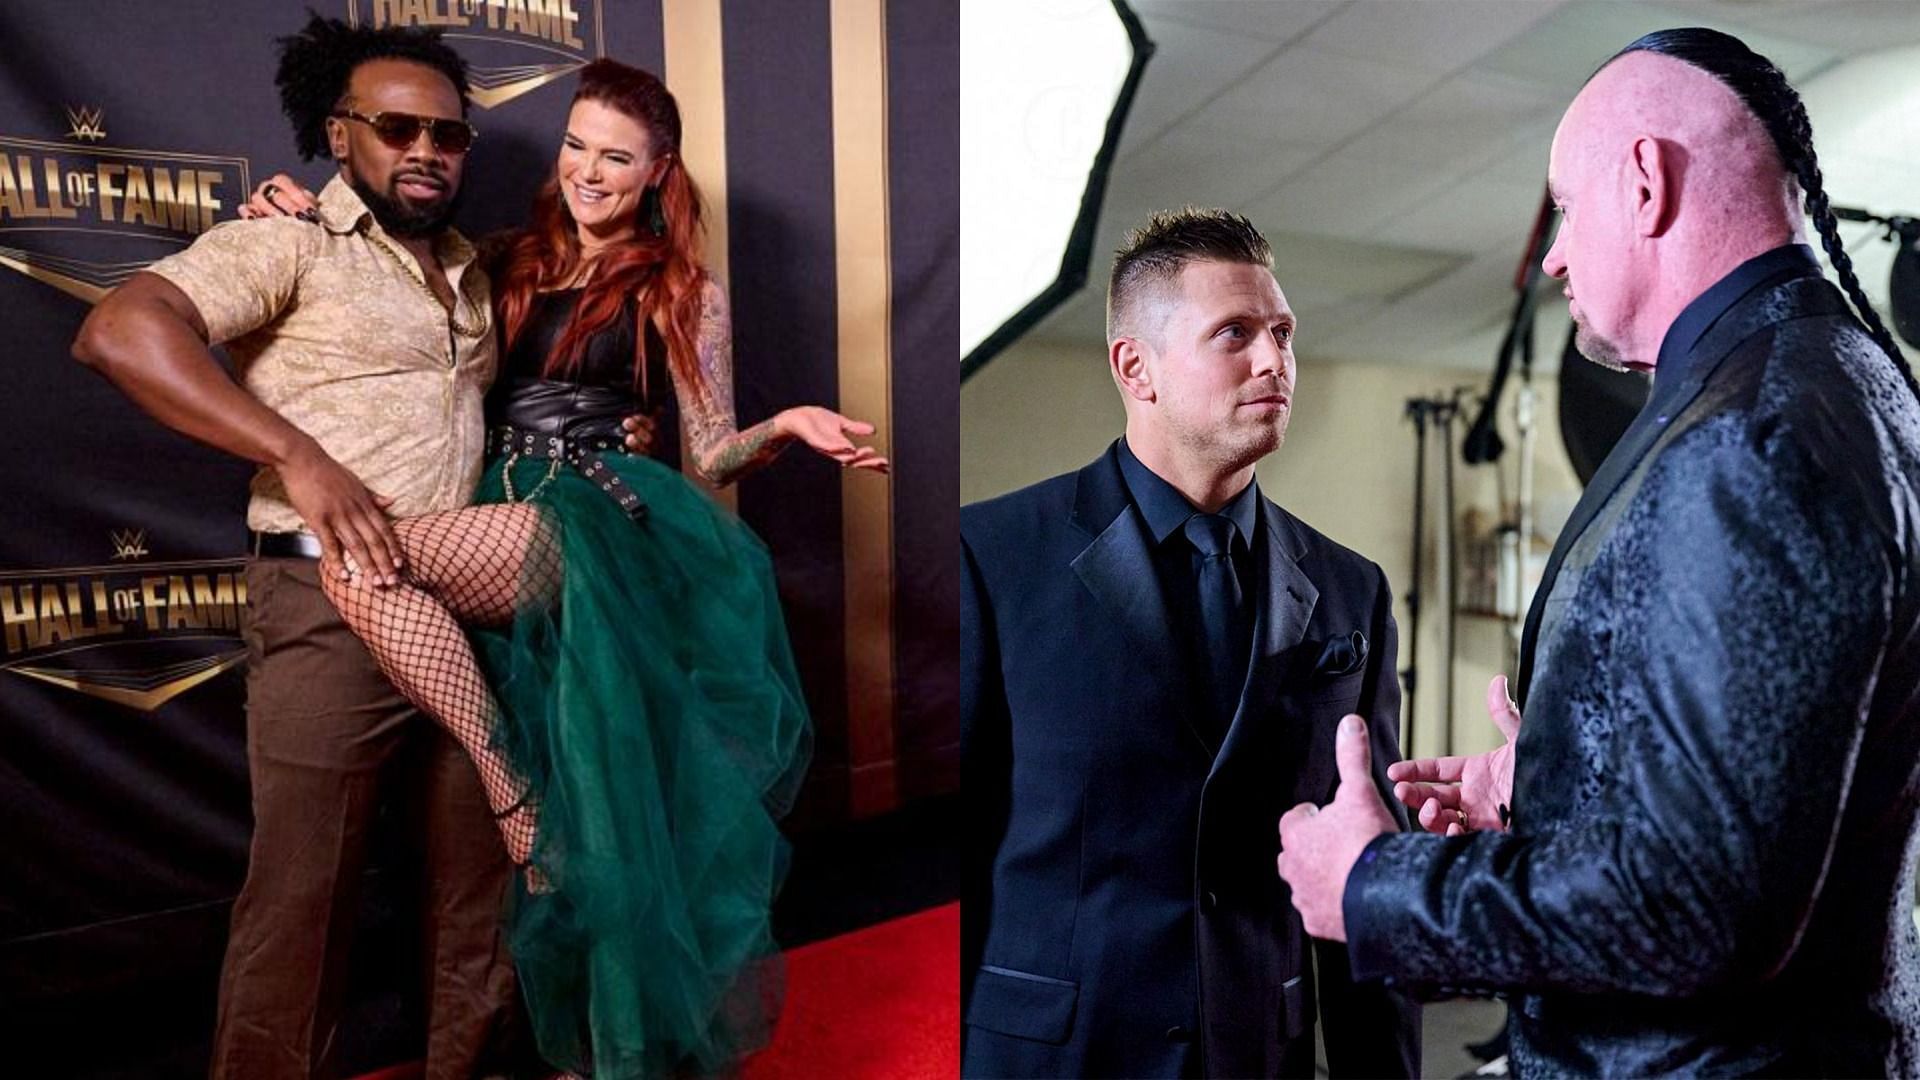 Xavier Woods and Lita (left); The Miz and The Undertaker (right)